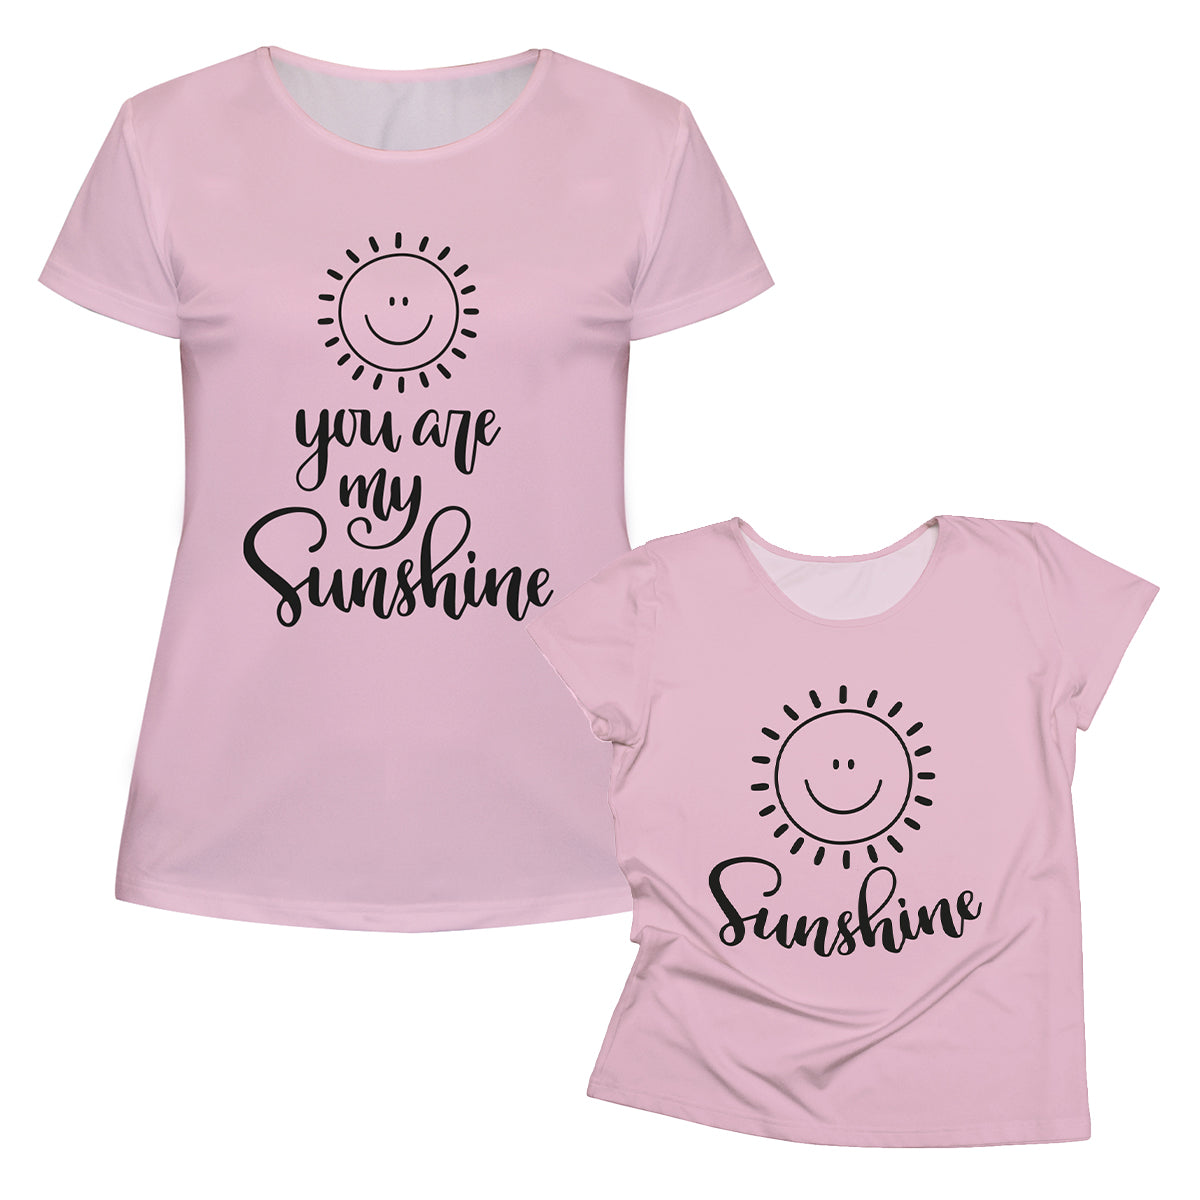 You Are My Sunshine Pink Short Sleeve Tee Shirt - Wimziy&Co.